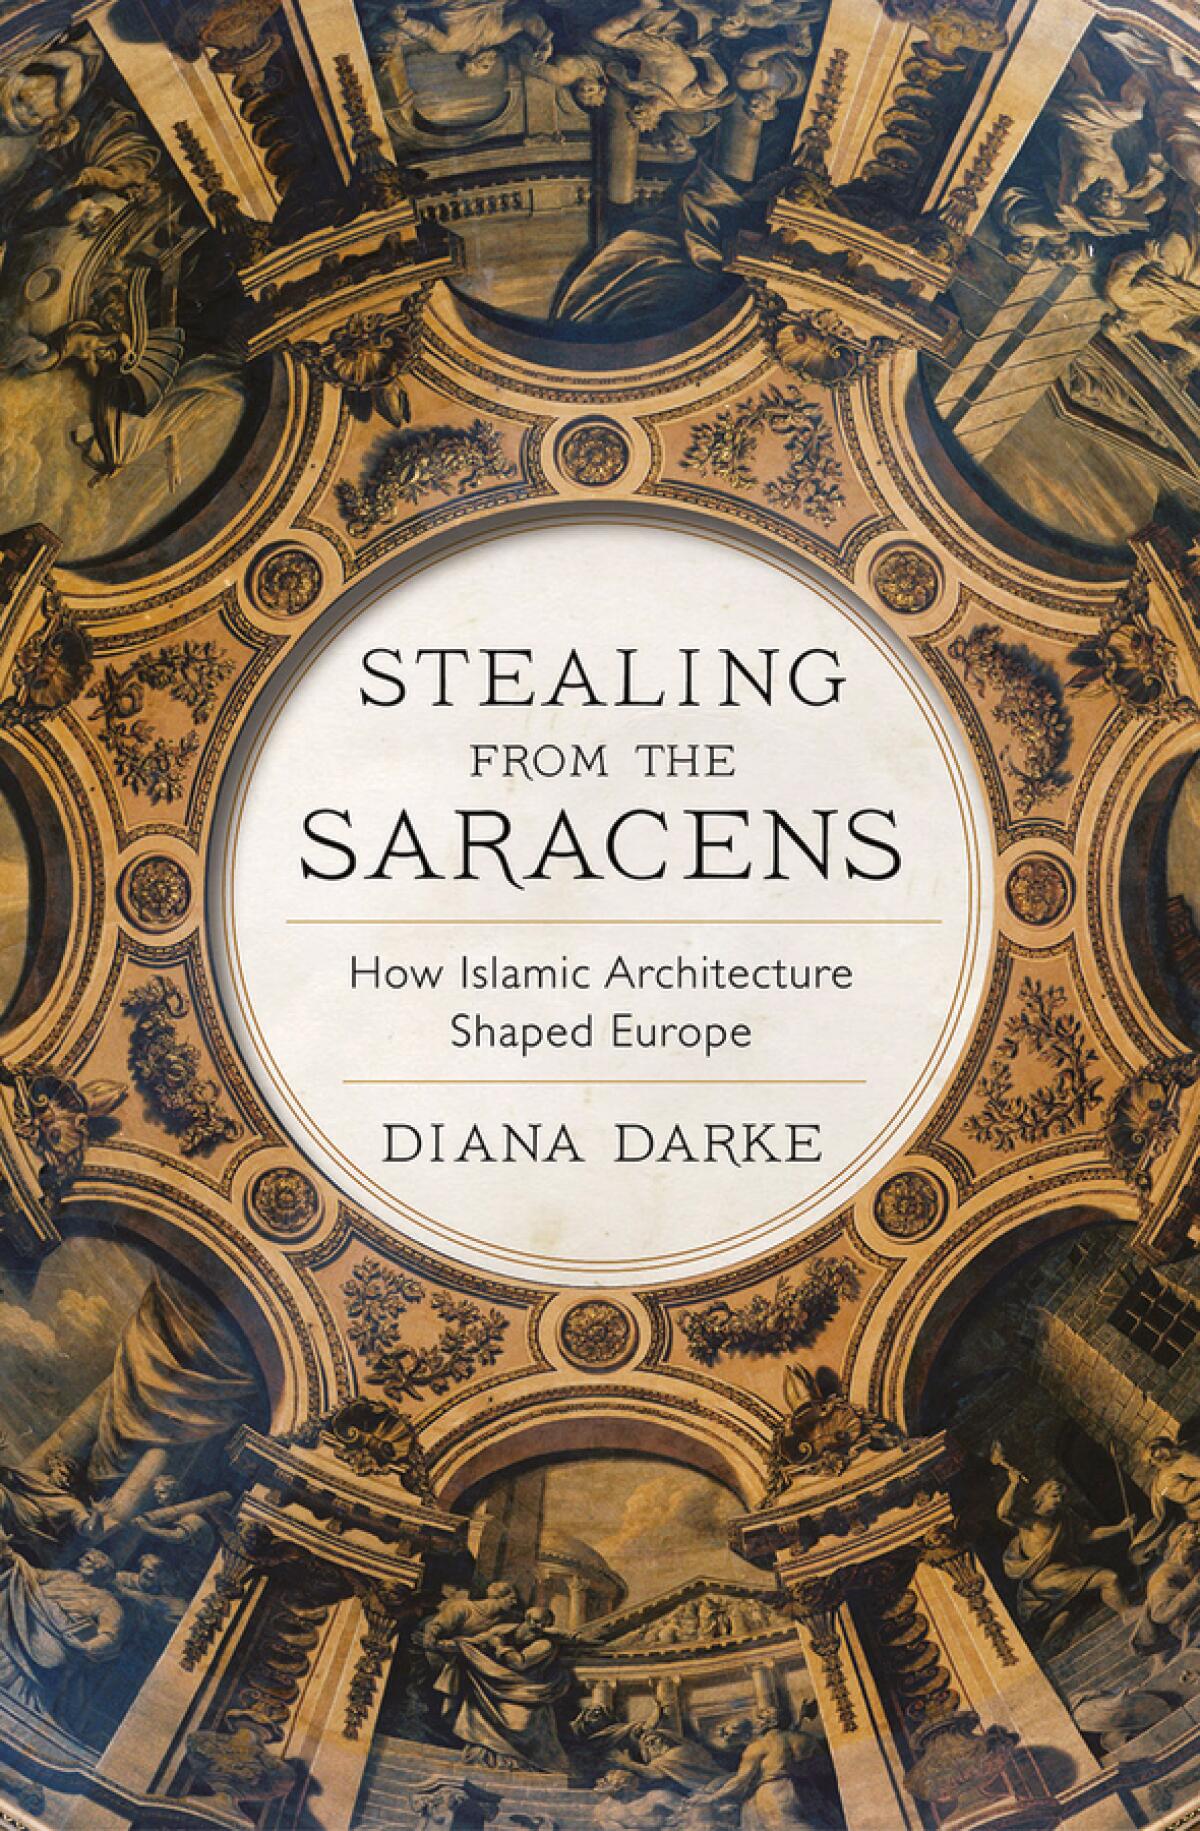 The book cover for "Stealing From the Saracens" shows an upward view toward a European-style dome